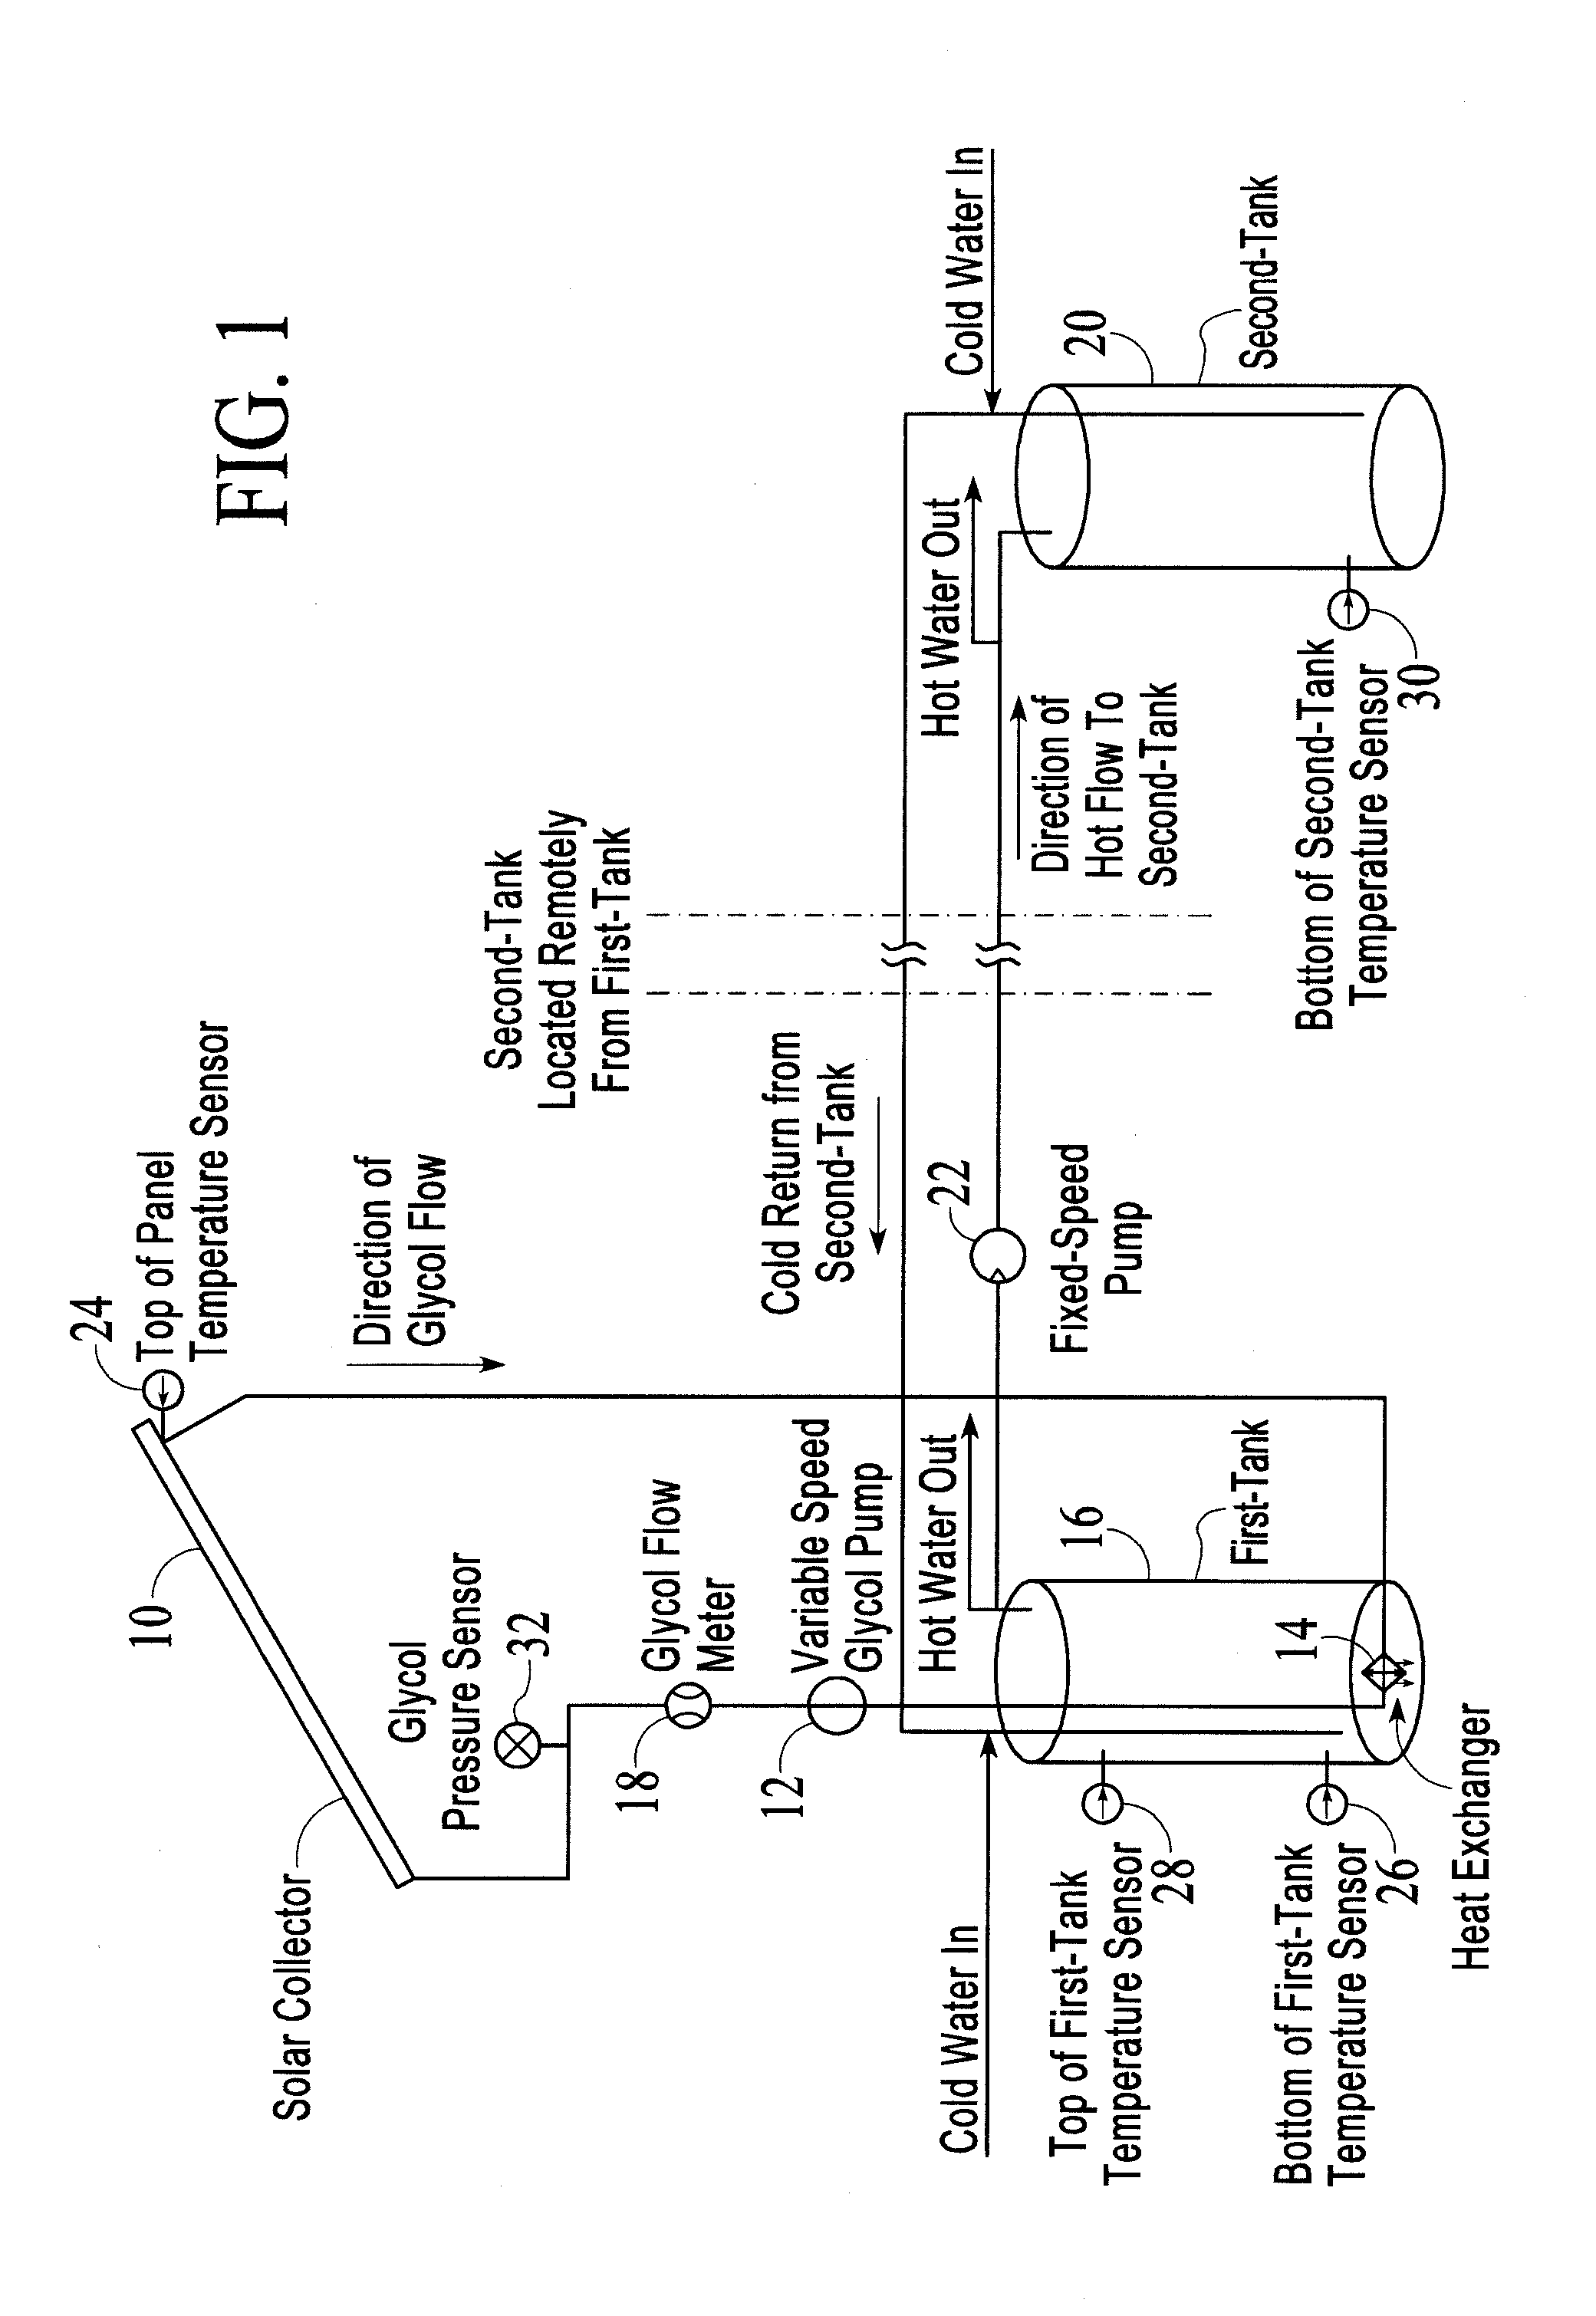 Control system simulator and simplified interconnection control system